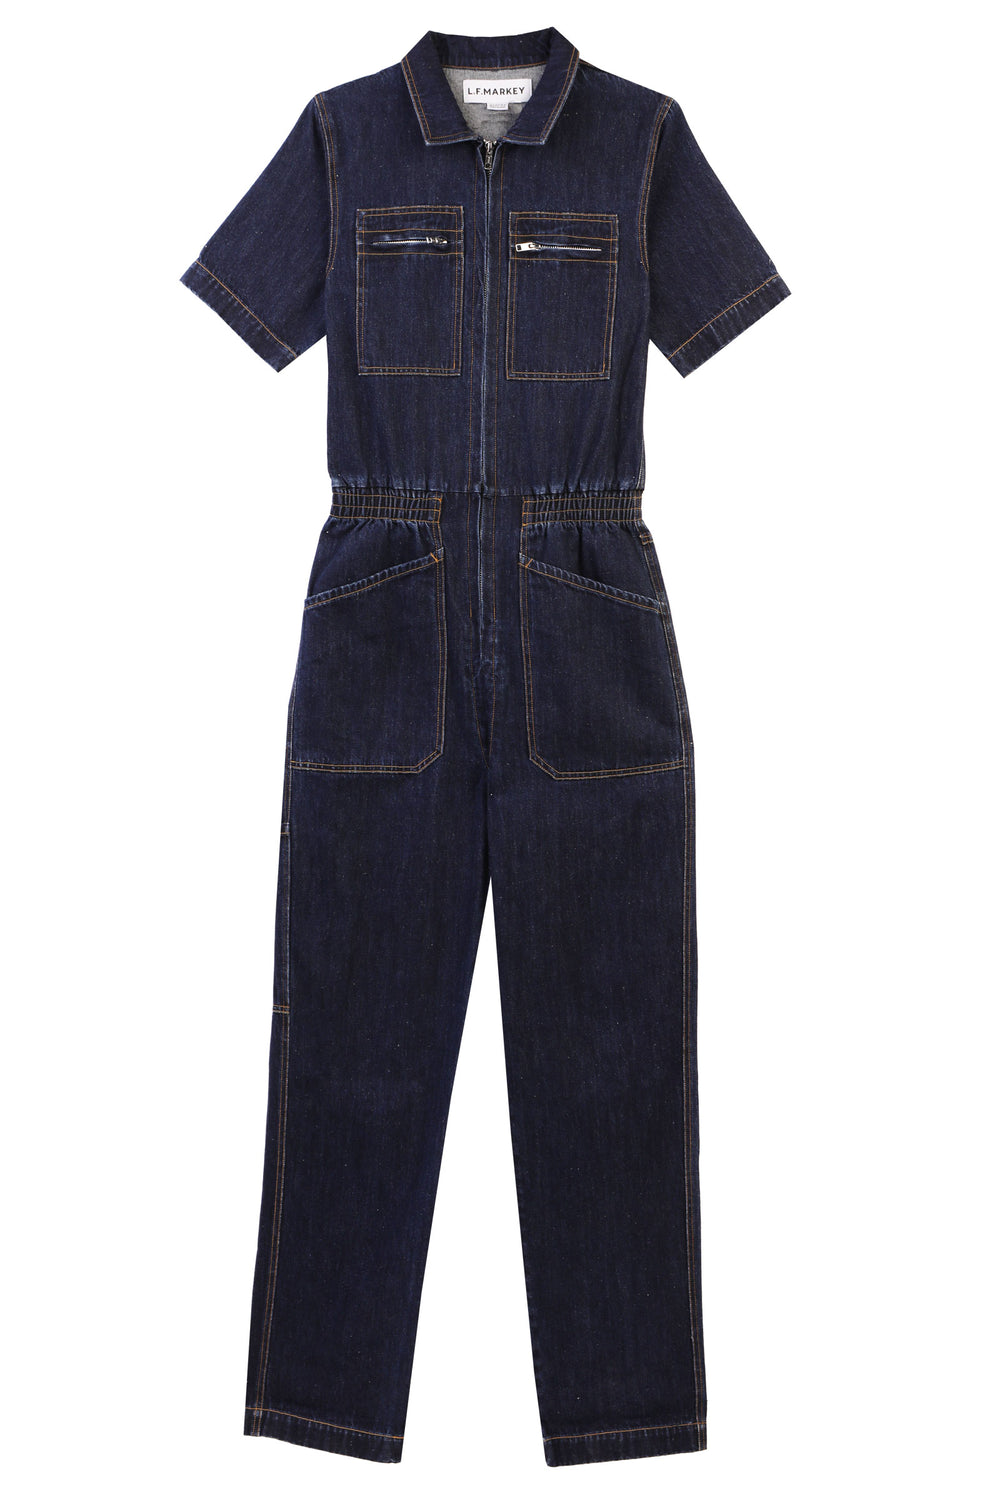 LF Markey indigo denim boiler suit with zip fastening and short sleeves. Side patch pockets and zip chest pockets. 